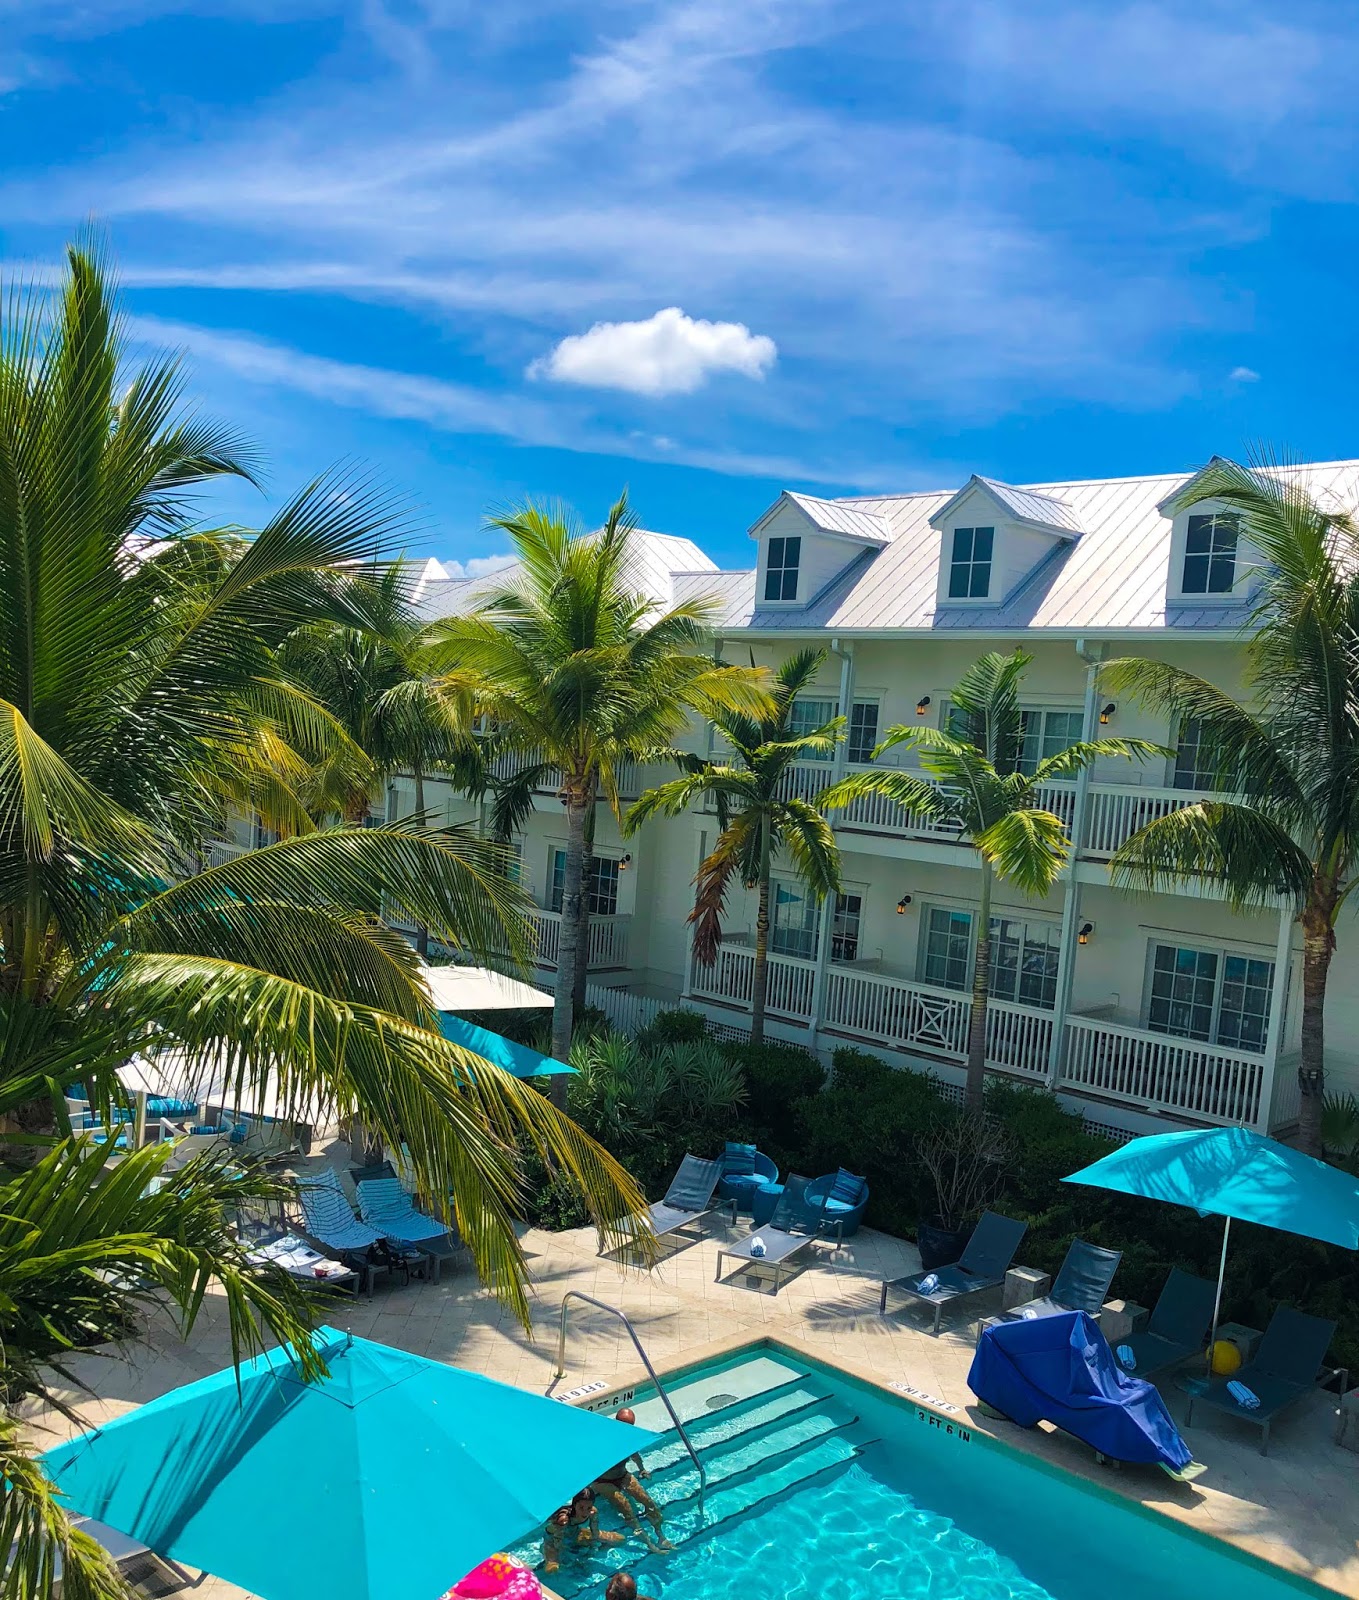 Best Places To Stay In The Florida Keys | TfDiaries